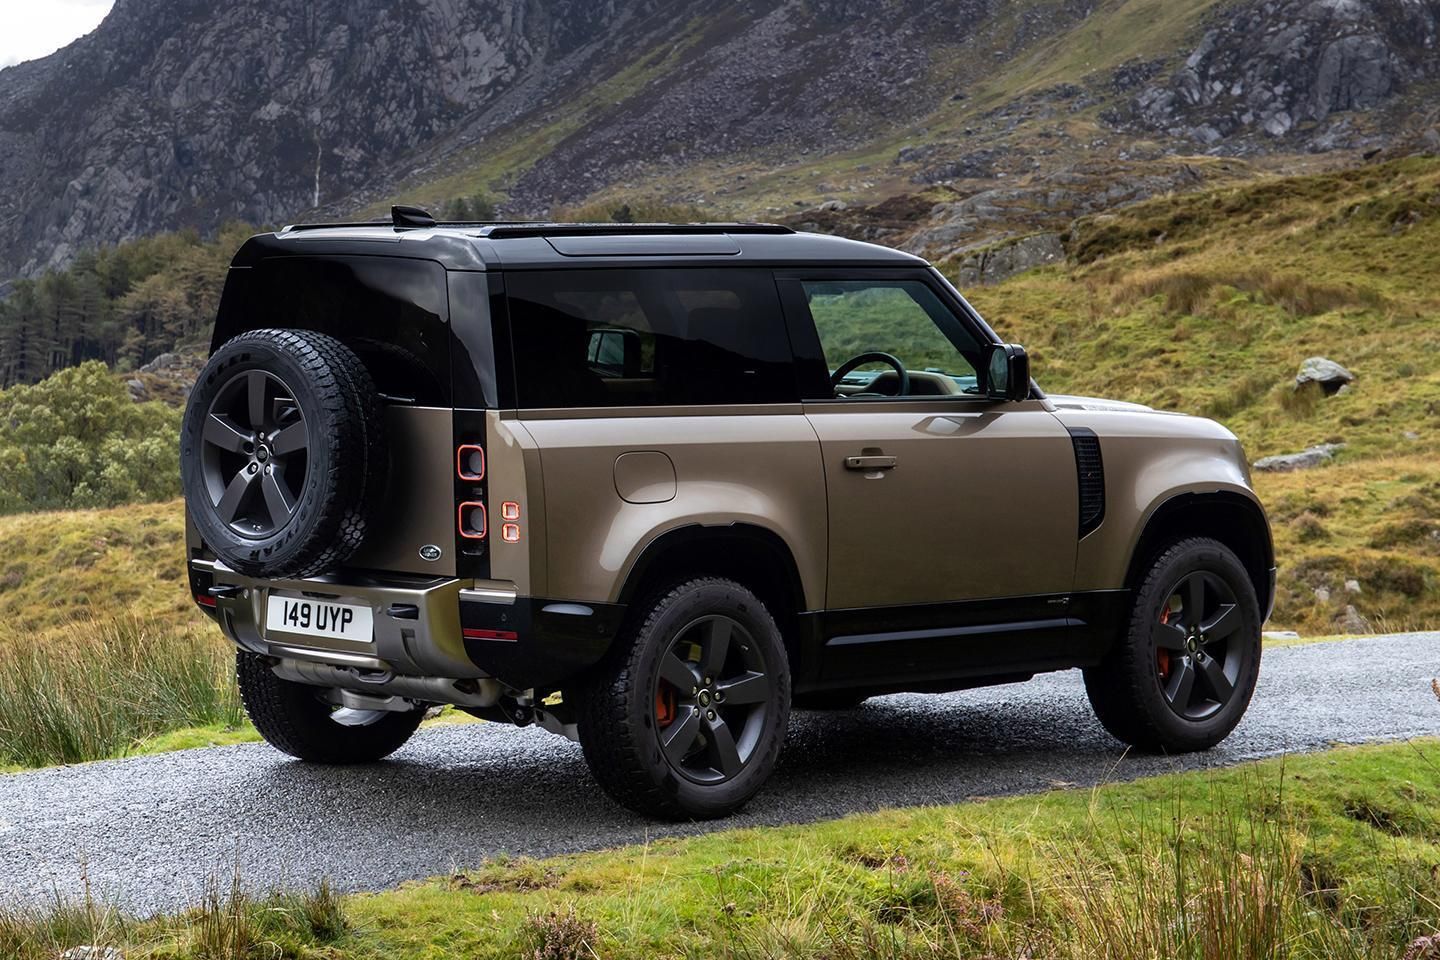 2020 Land Rover Defender: Review, Videos